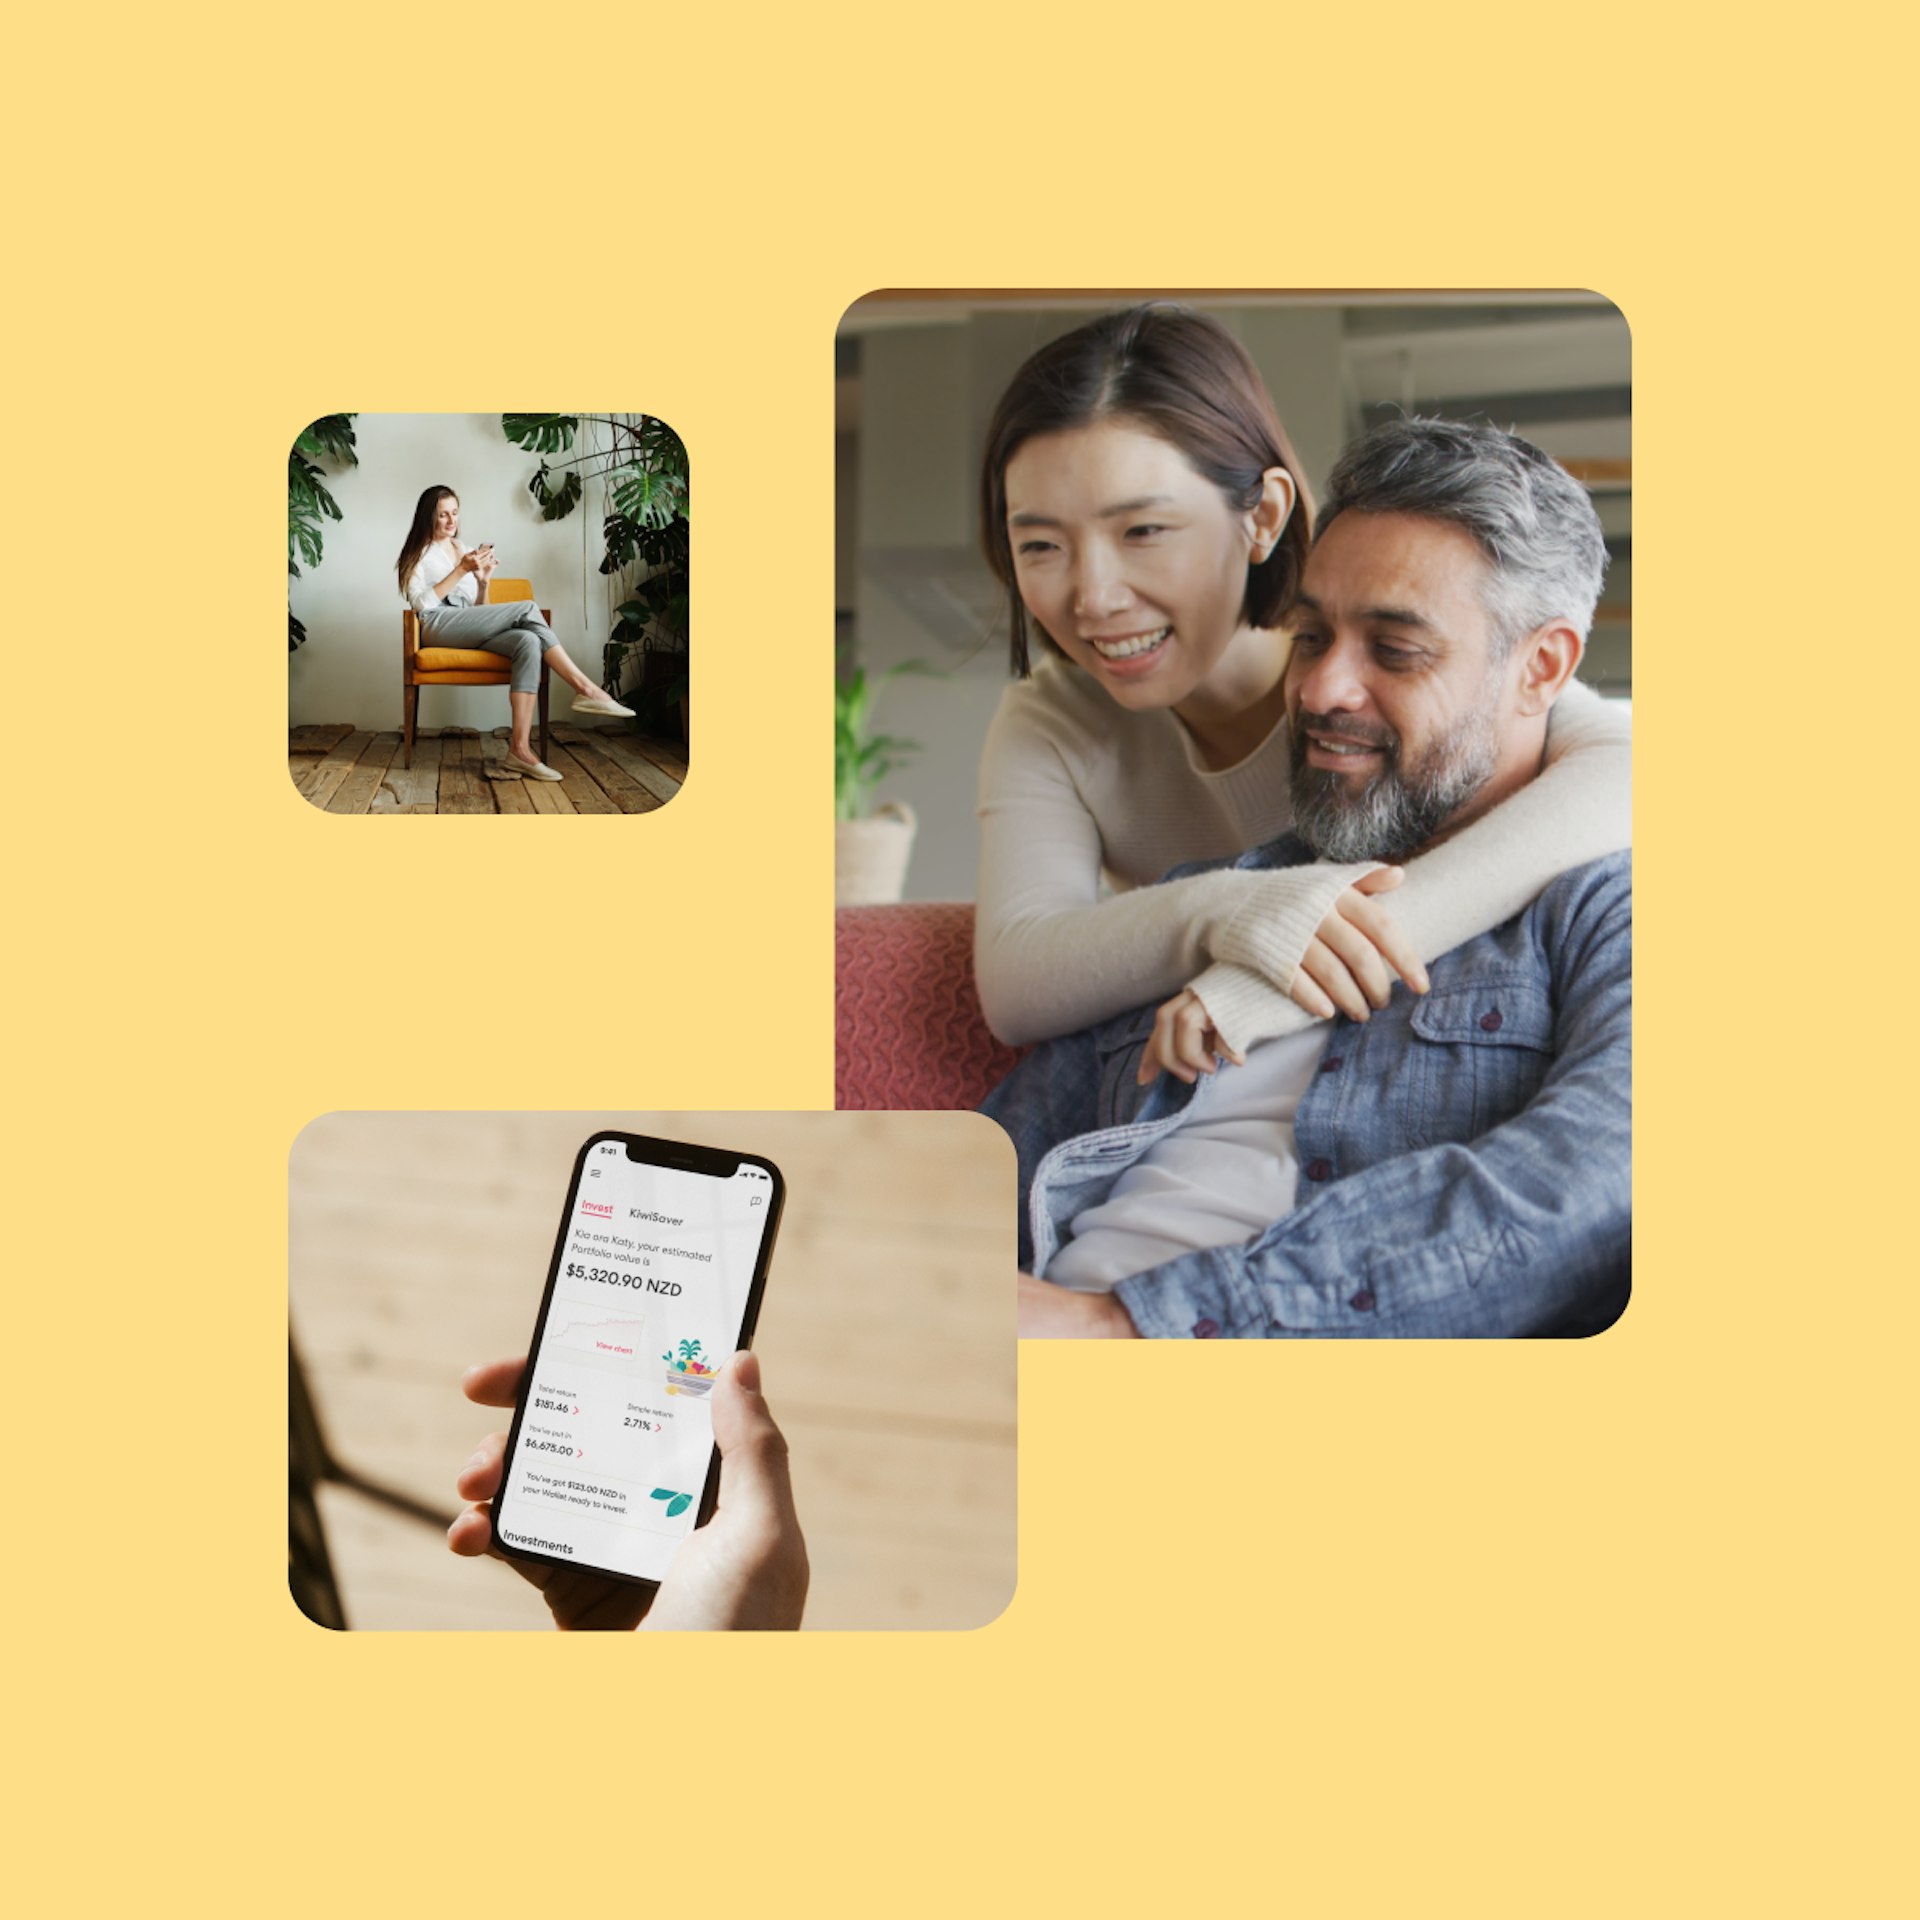 A cluster of three images—a woman sitting on a chair, a couple in an embrace, and a Sharesies Portfolio displayed on a phone.